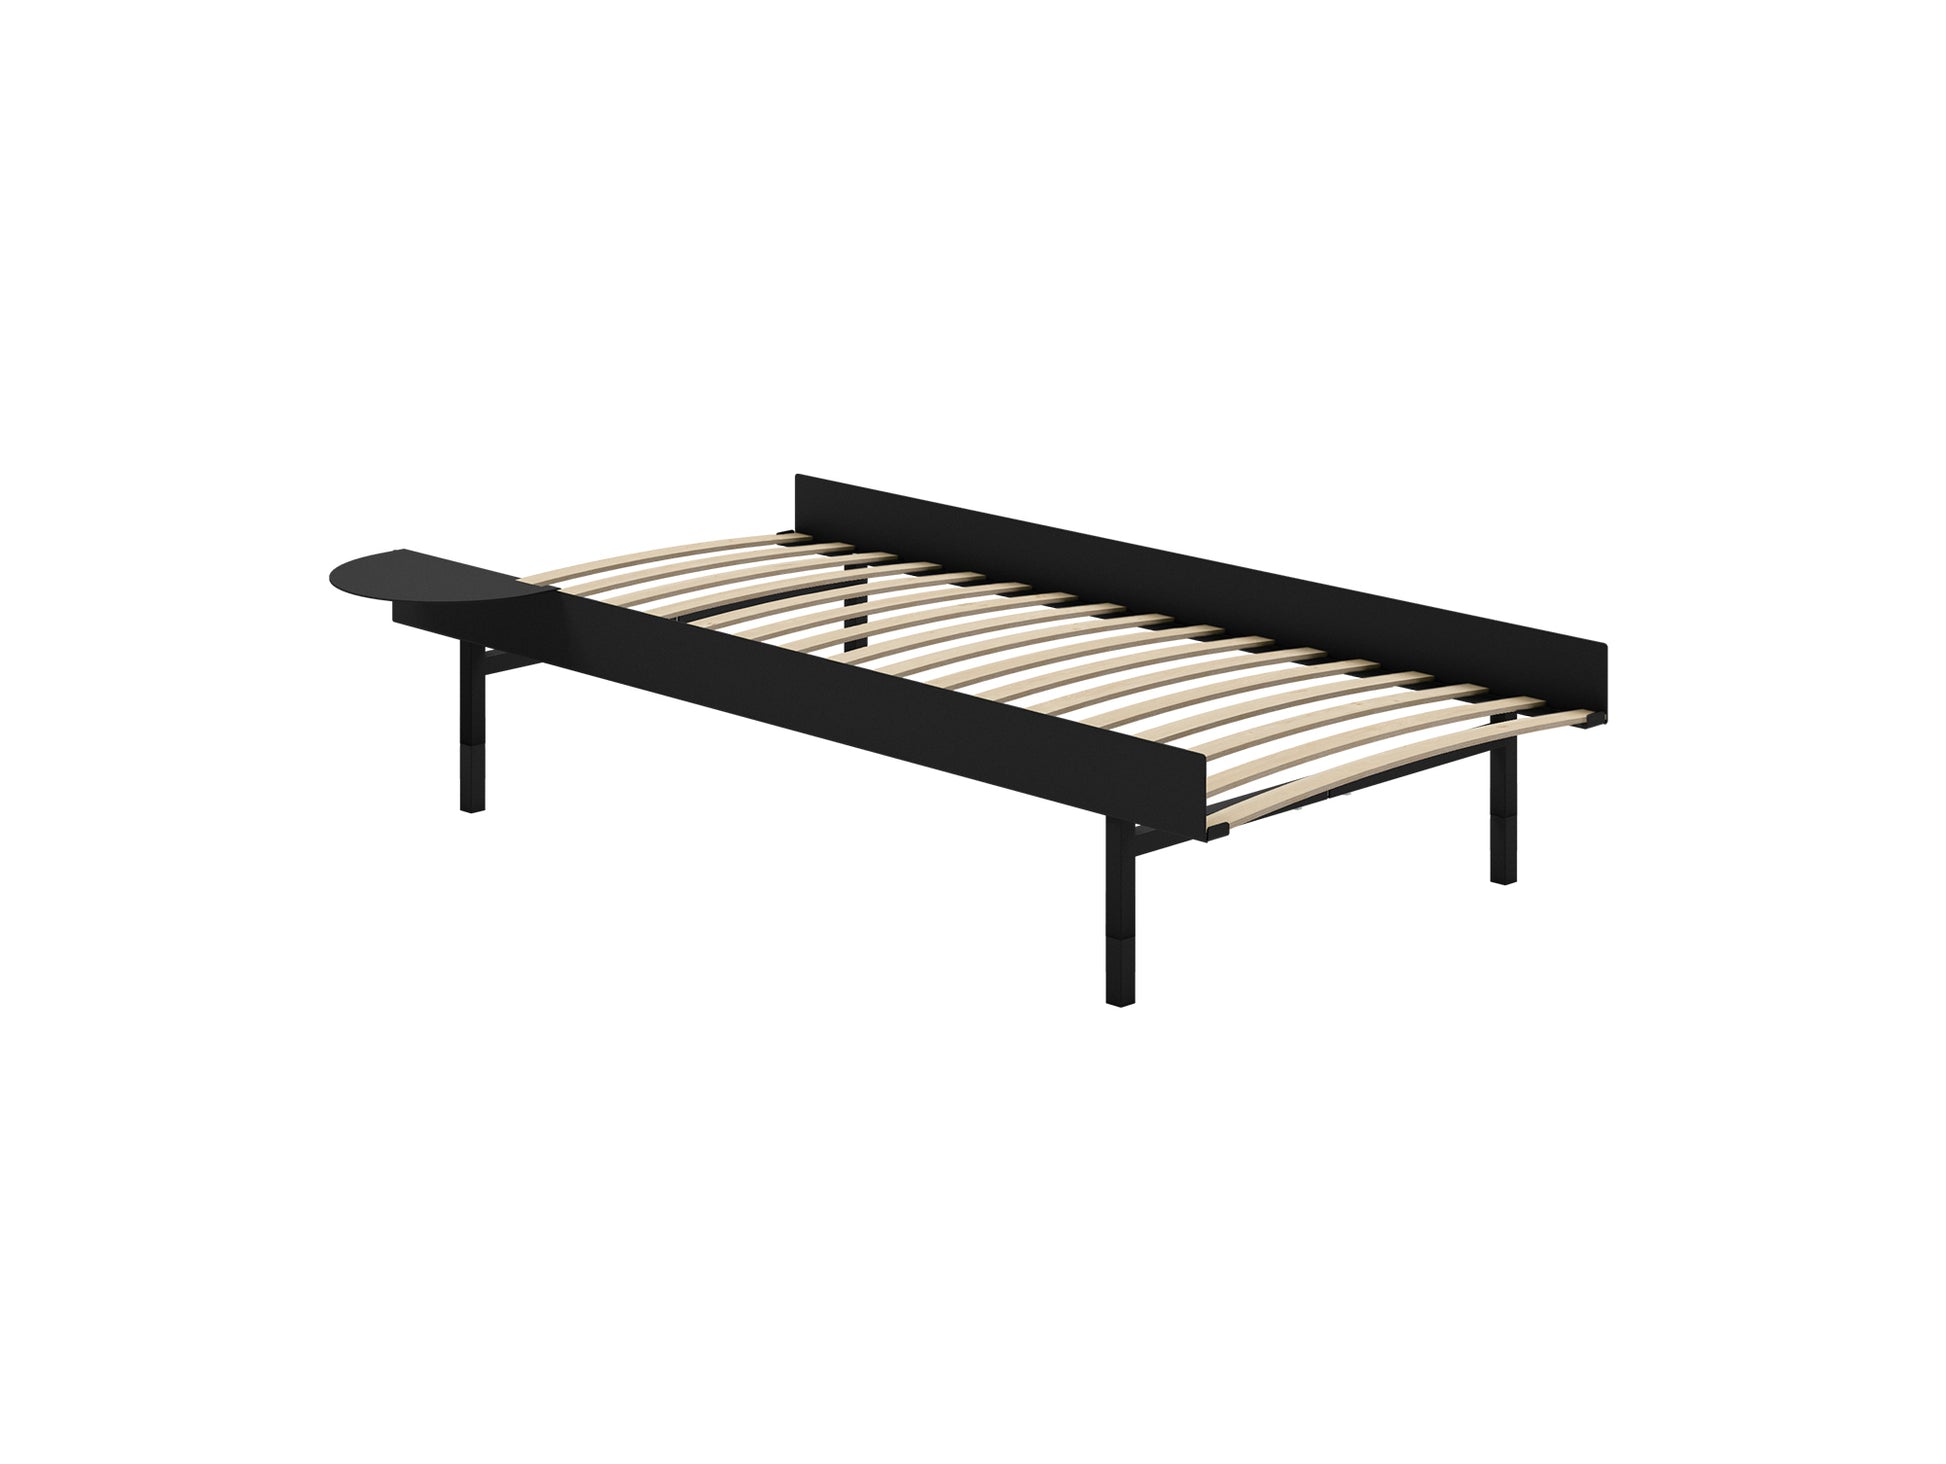 Bed 90 - 180 cm (High) by Moebe- Bed Frame / with 90cm wide Slats /  1 Side Table / Black